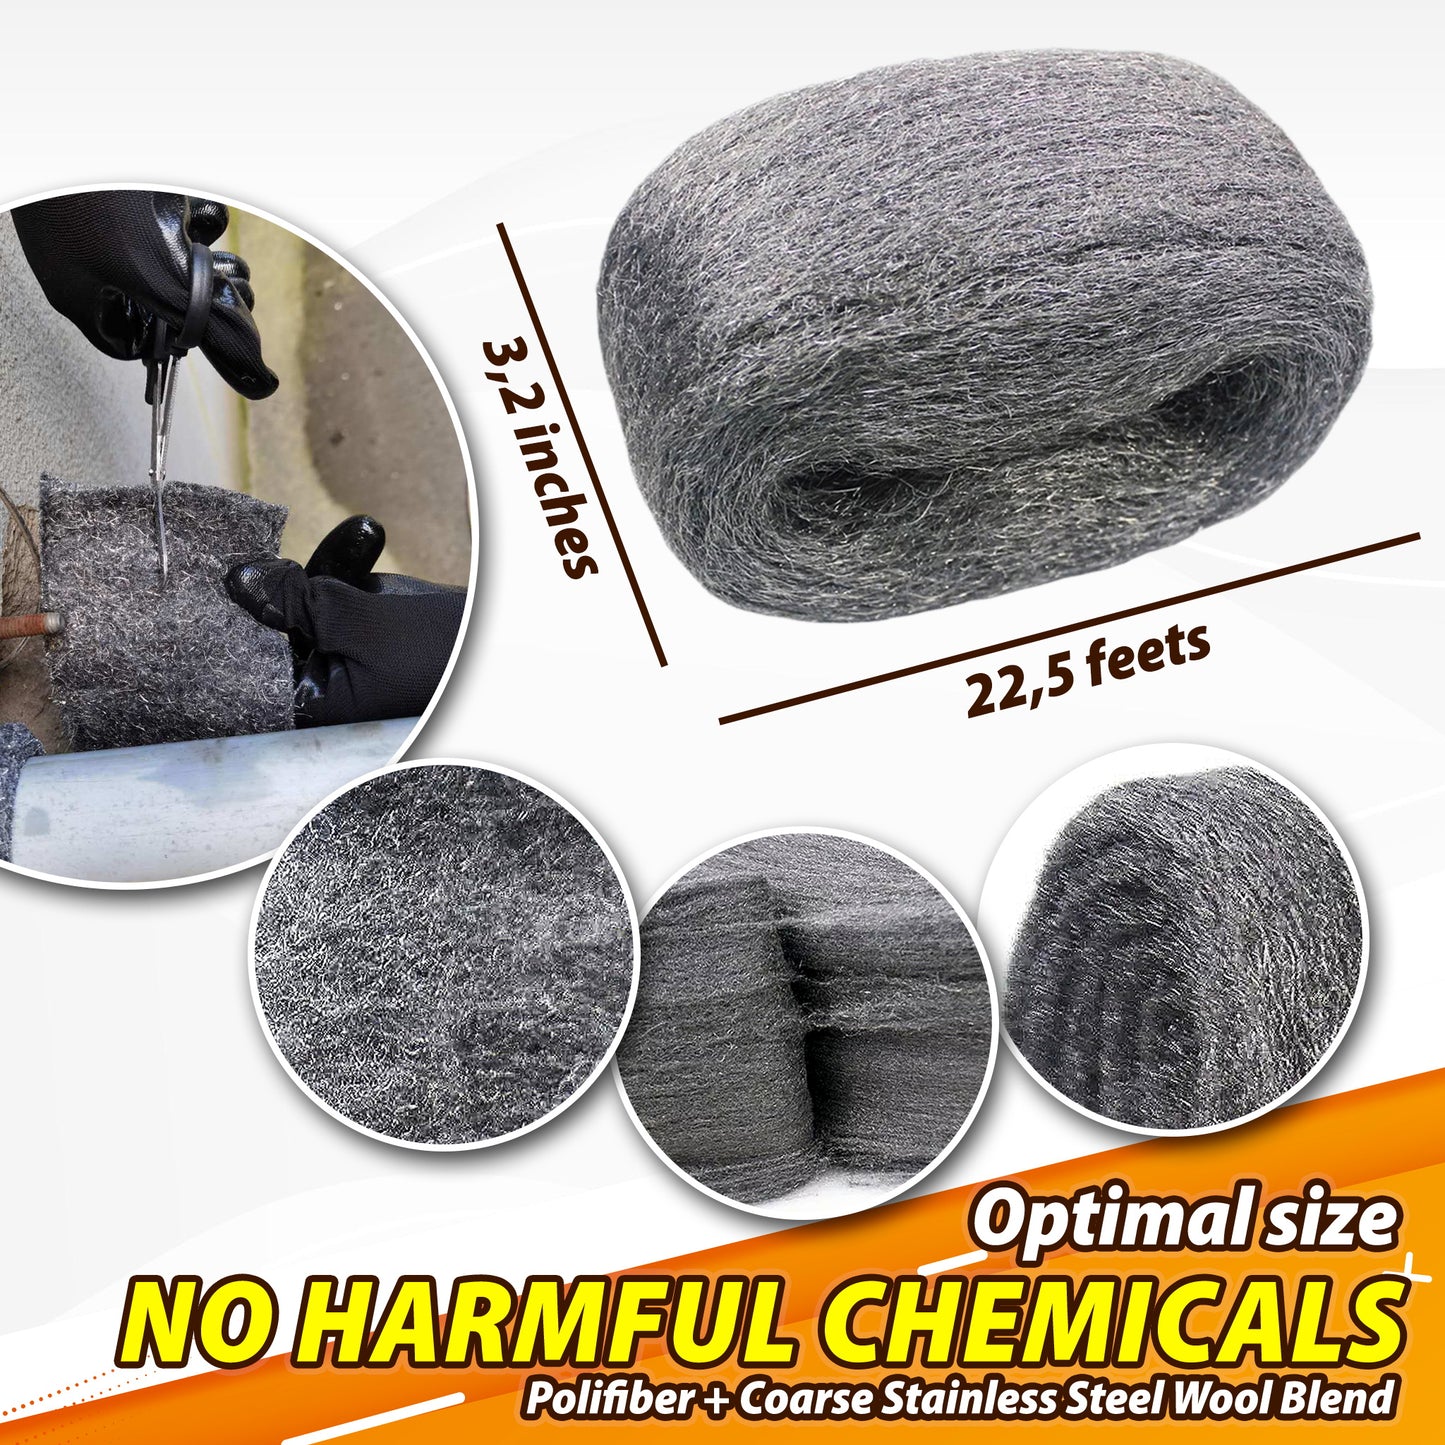 FIRESHEL Steel Wool Mice Fabric Roll Control 2 Pcs Total (3.2”x 22.5 Feet) - Gap Fill Fabric - Block Holes, Wall Cracks, Cleans Rusty Tools, Hardware DIY Kit - One Pair of Gloves and Scissor Included